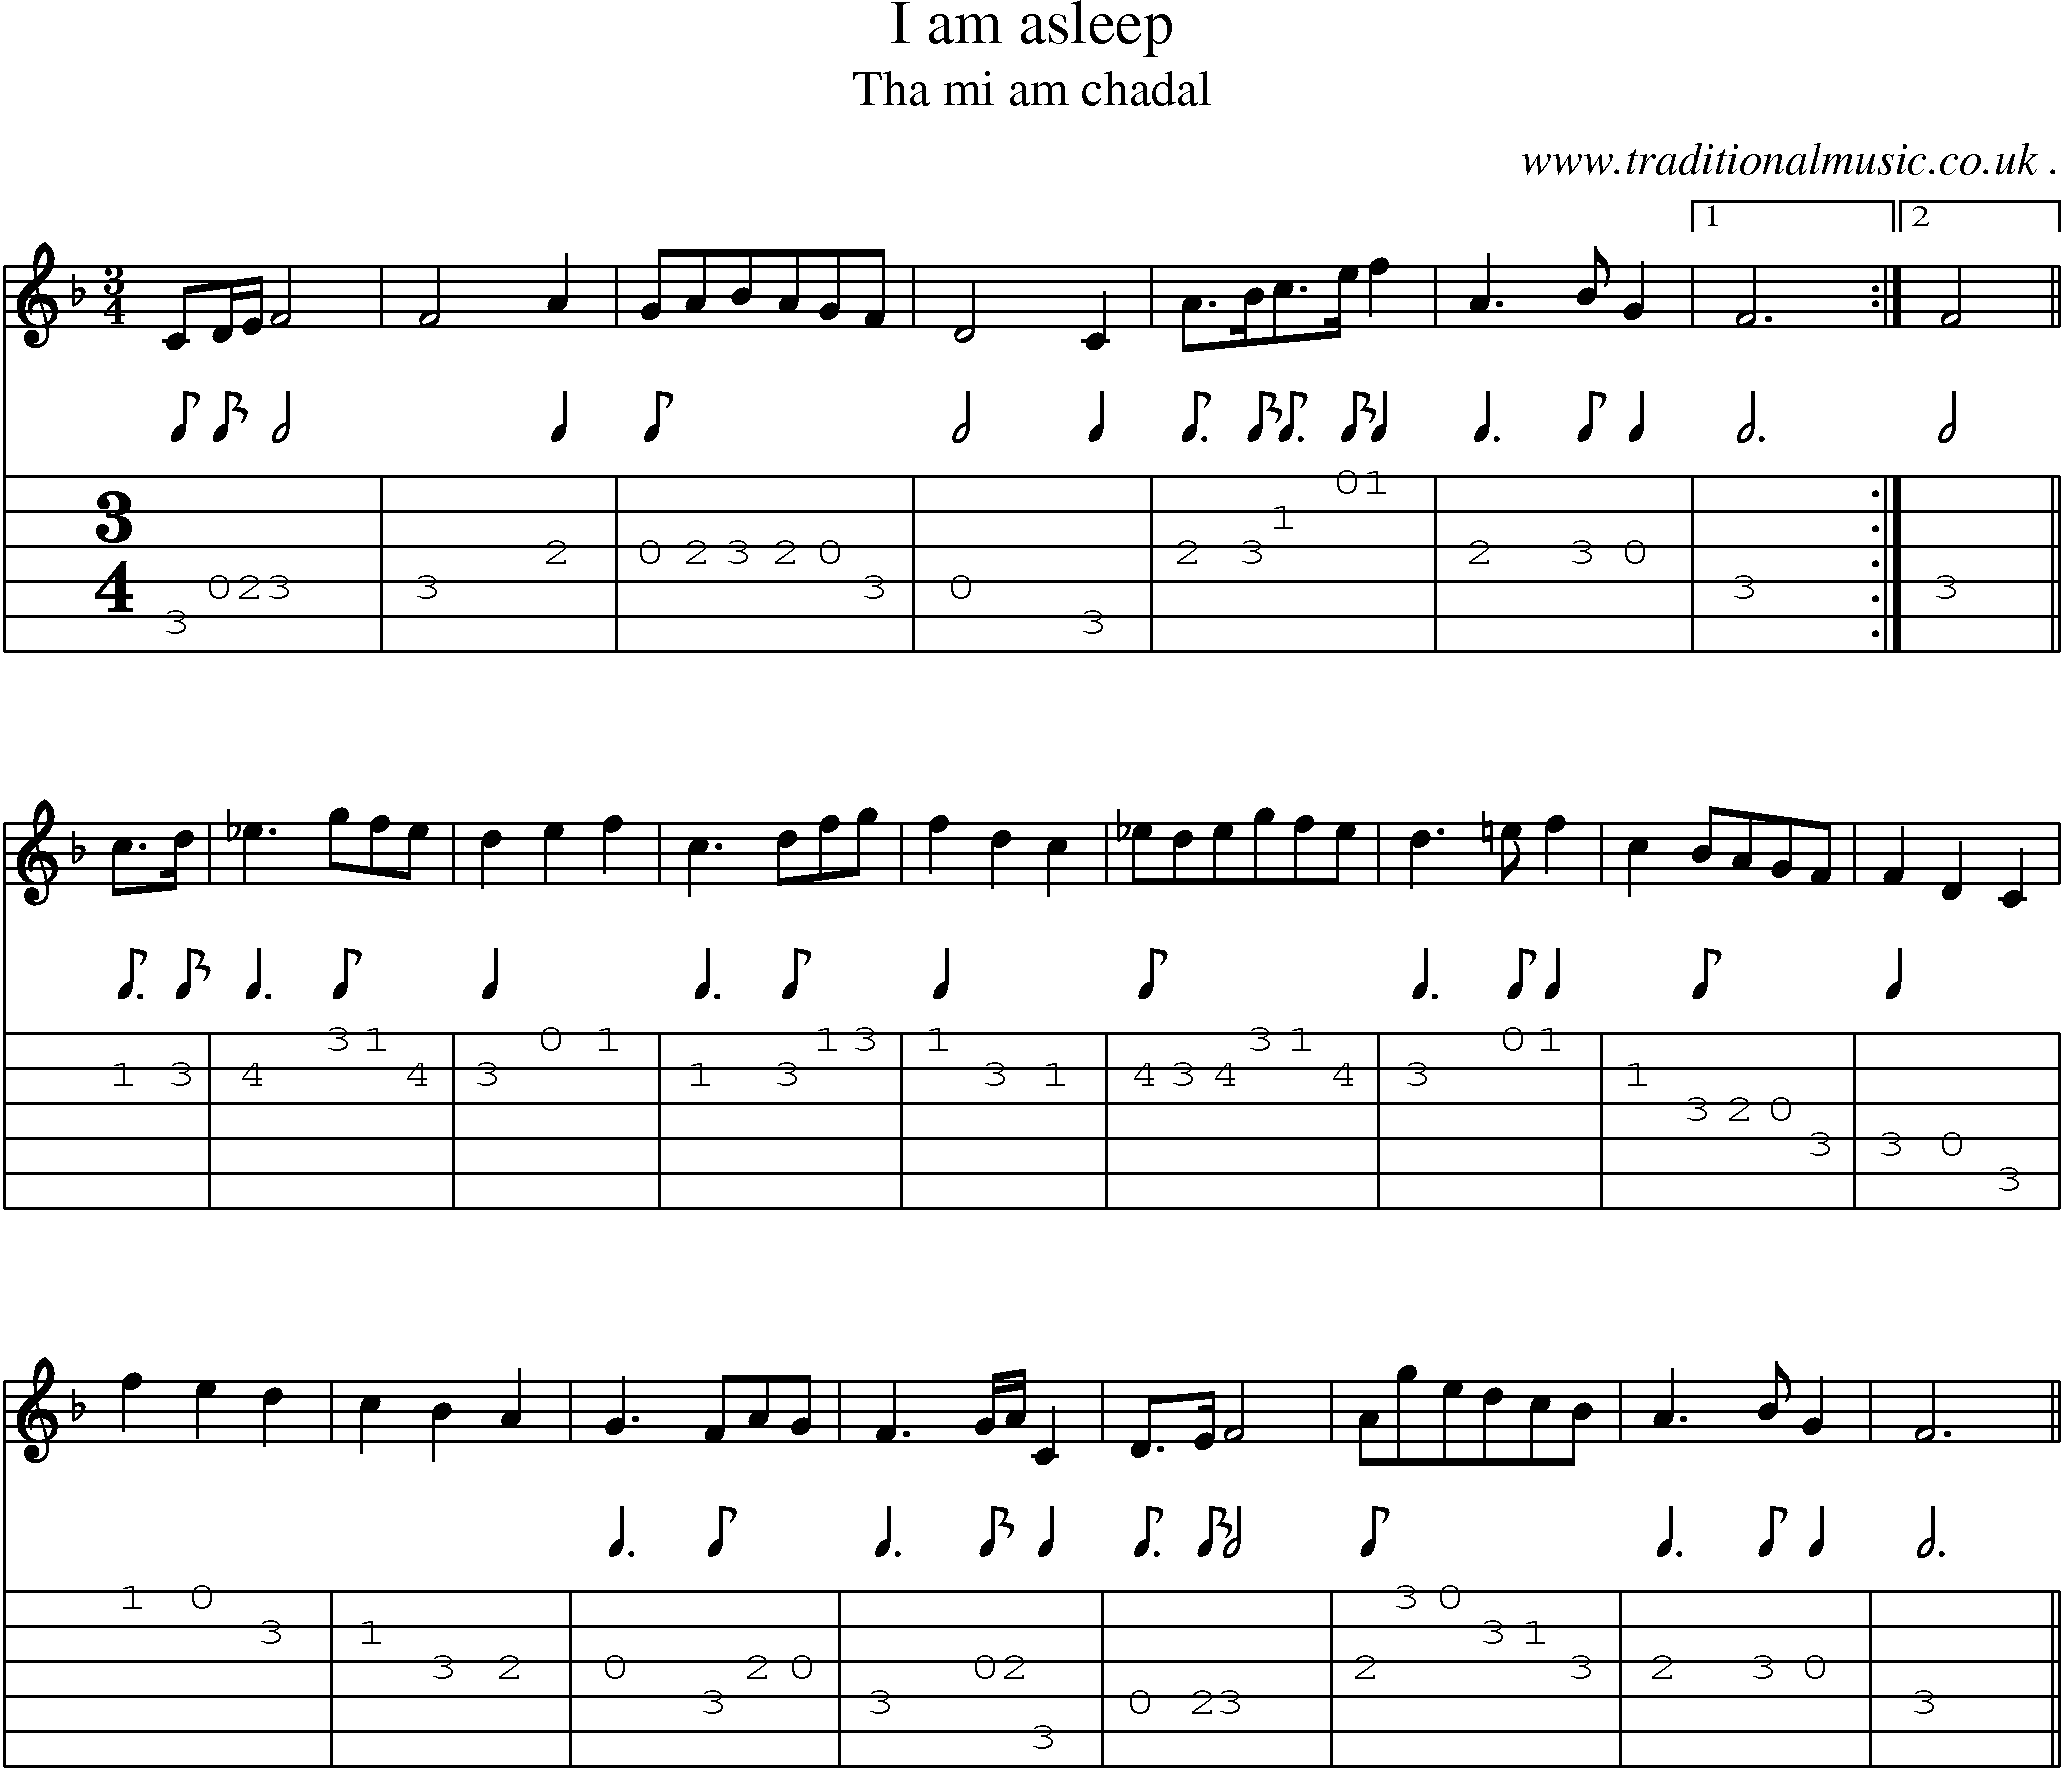 Sheet-music  score, Chords and Guitar Tabs for I Am Asleep